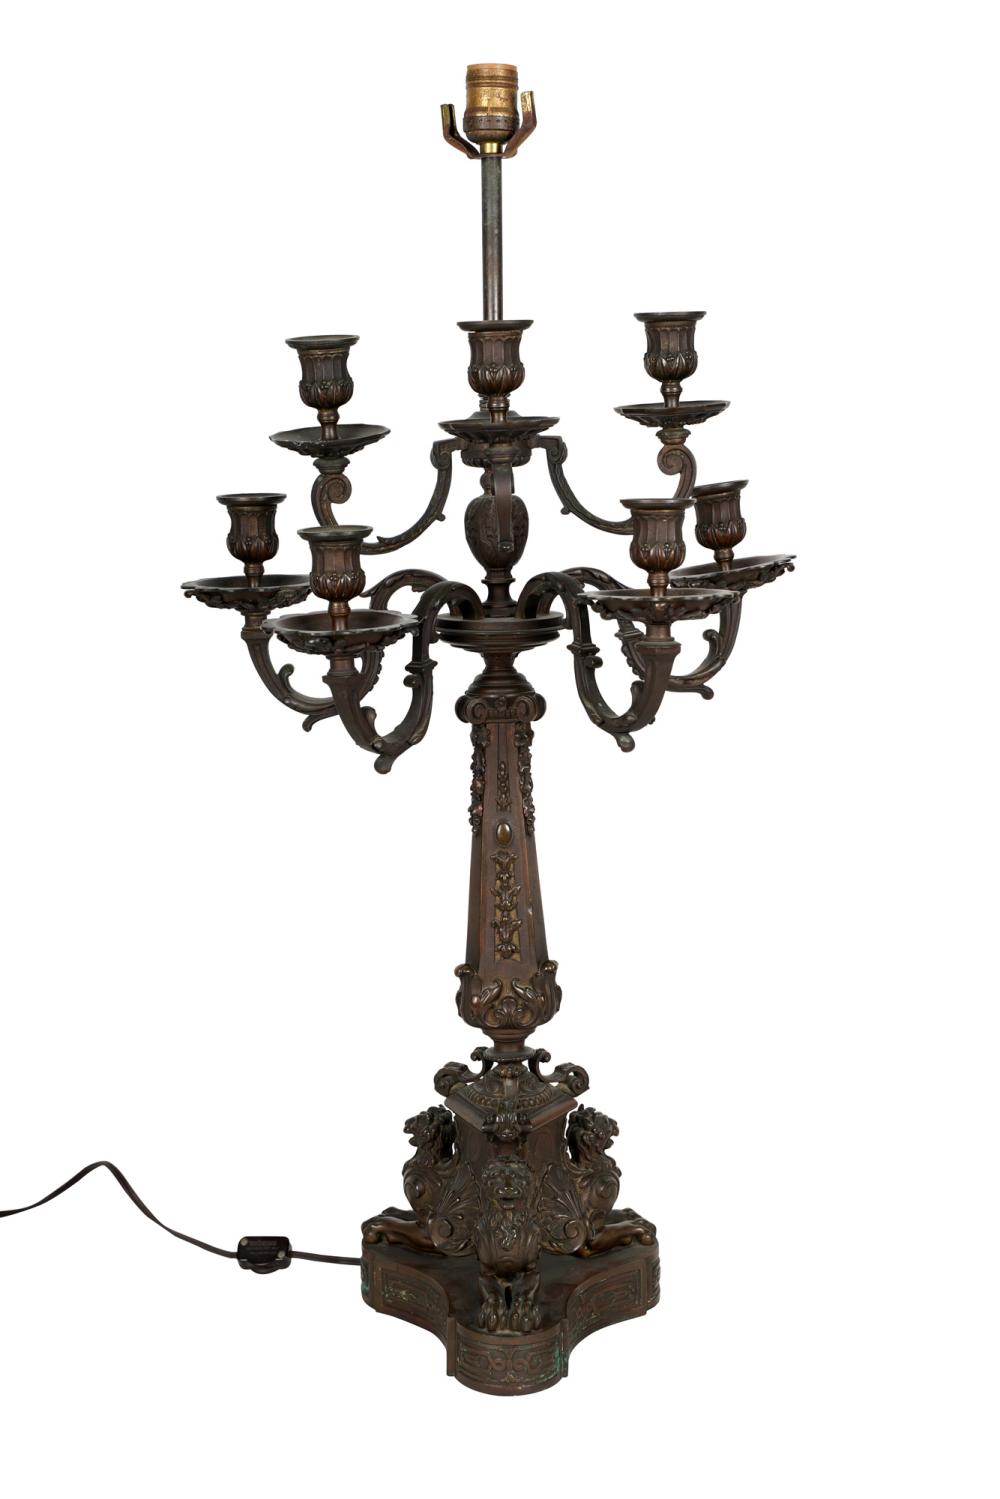 NEOCLASSIC STYLE BRONZE TABLE LAMP31